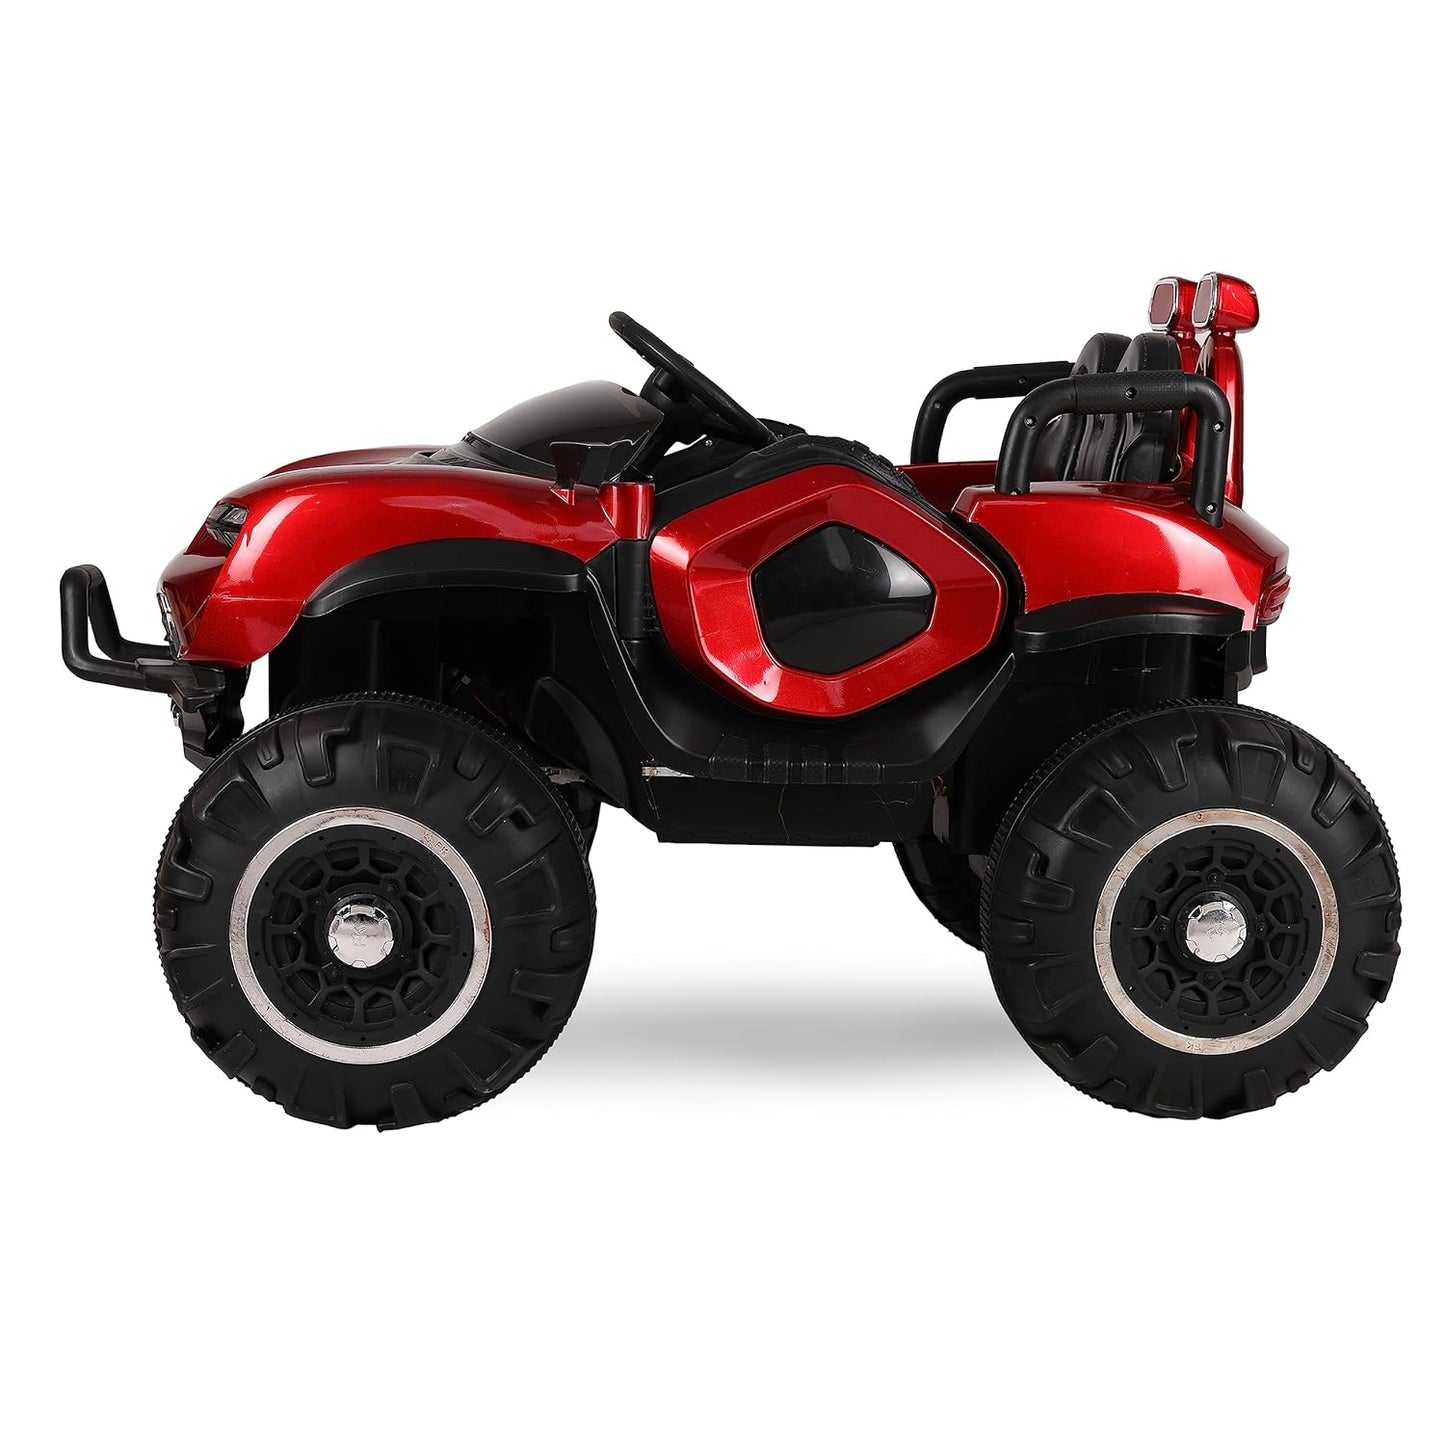 GettBoles 4X4 Electric Rechargeable Jeep for Kids of Age 2 to 7 Years- Battery Operated Car Jeep with Mic, M3 Player, Led Lights, Suspension and Bluetooth Remote (Red)